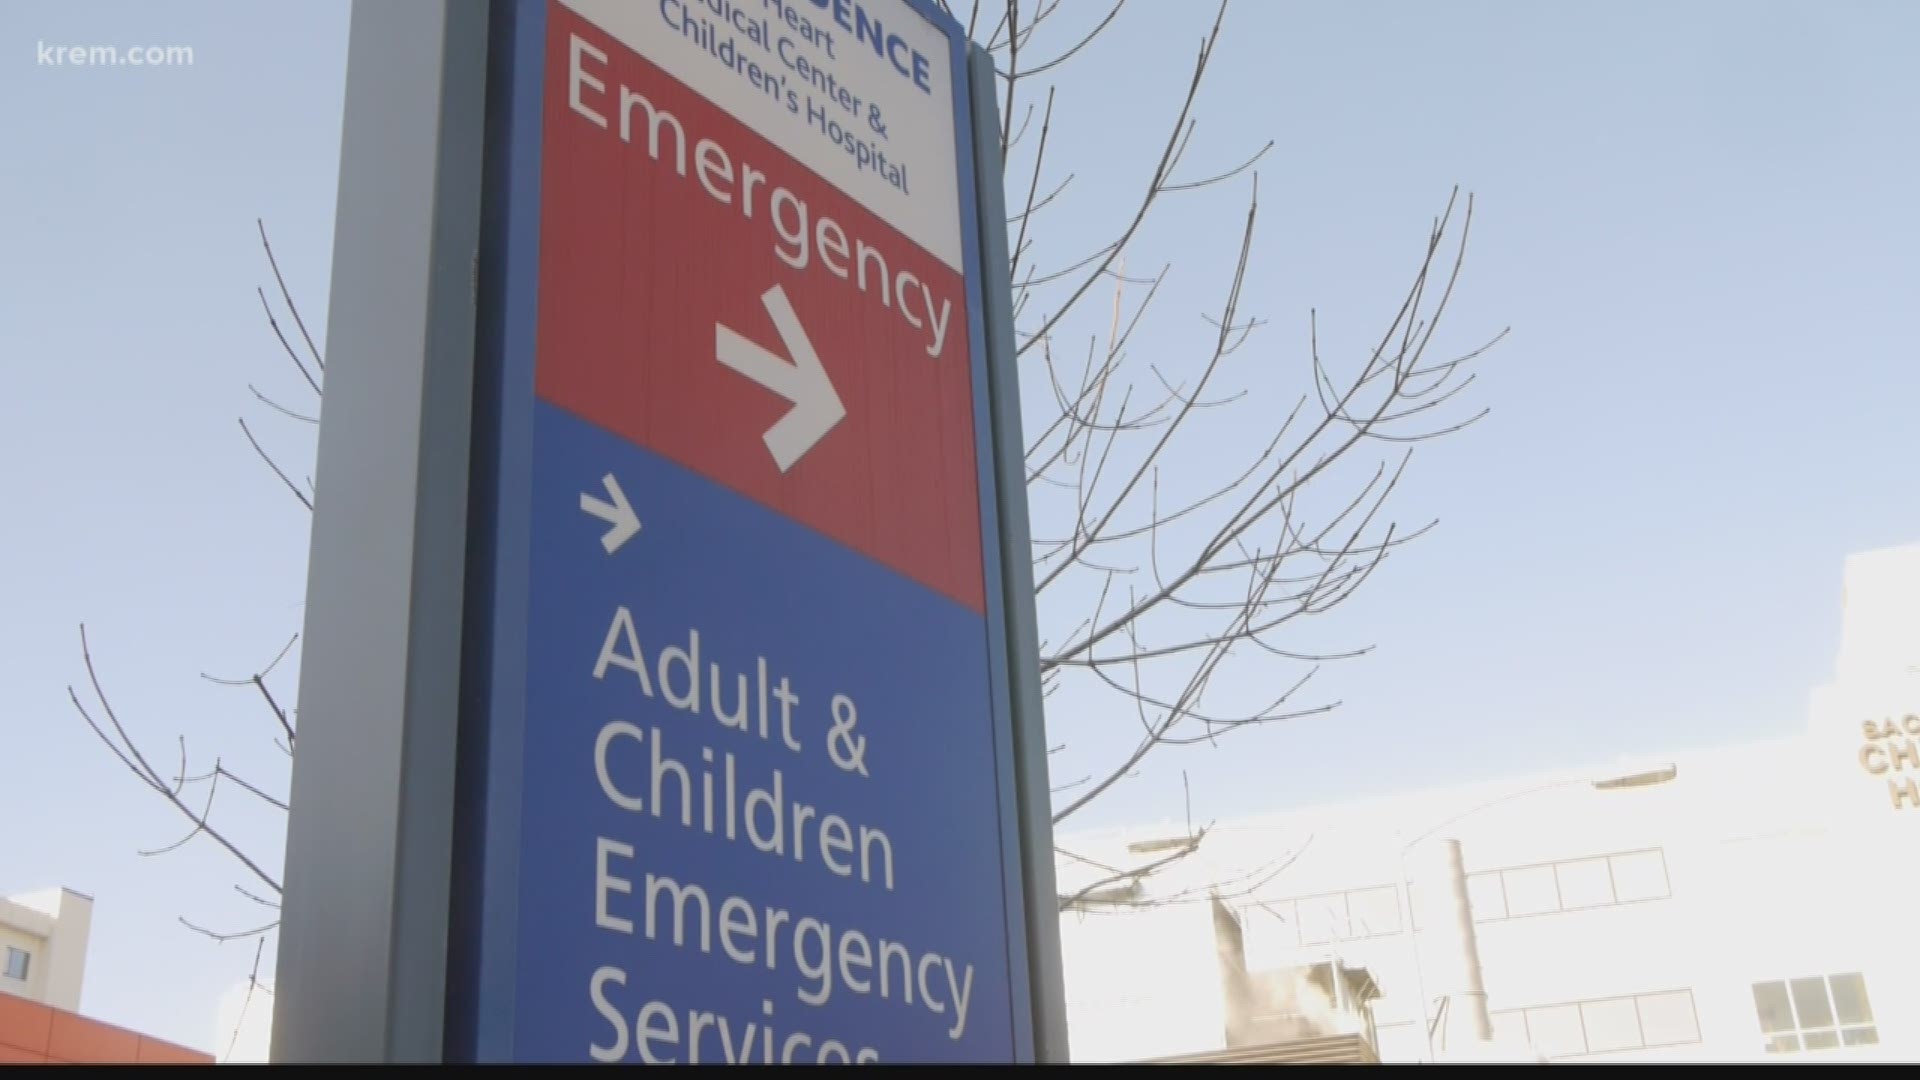 KREM's Nicole Hernandez investigated the reported long wait times at Sacred Heart's Emergency Room, and looked into what the hospital is doing to combat the problem.